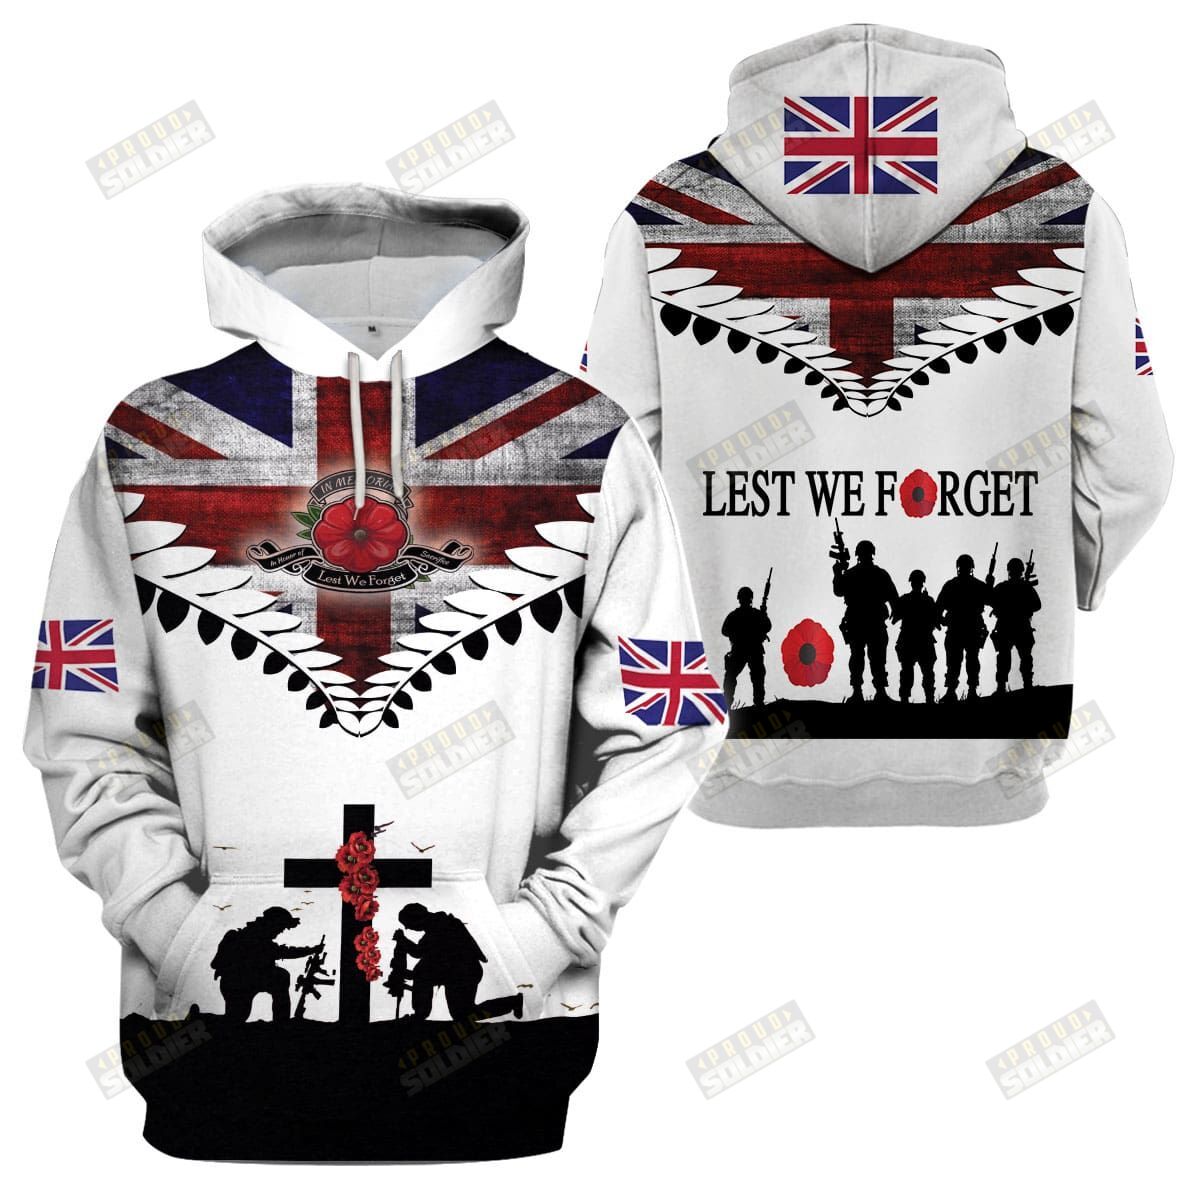 UK veterans lest we forget 3d hoodie and shirt – LIMITED EDITION